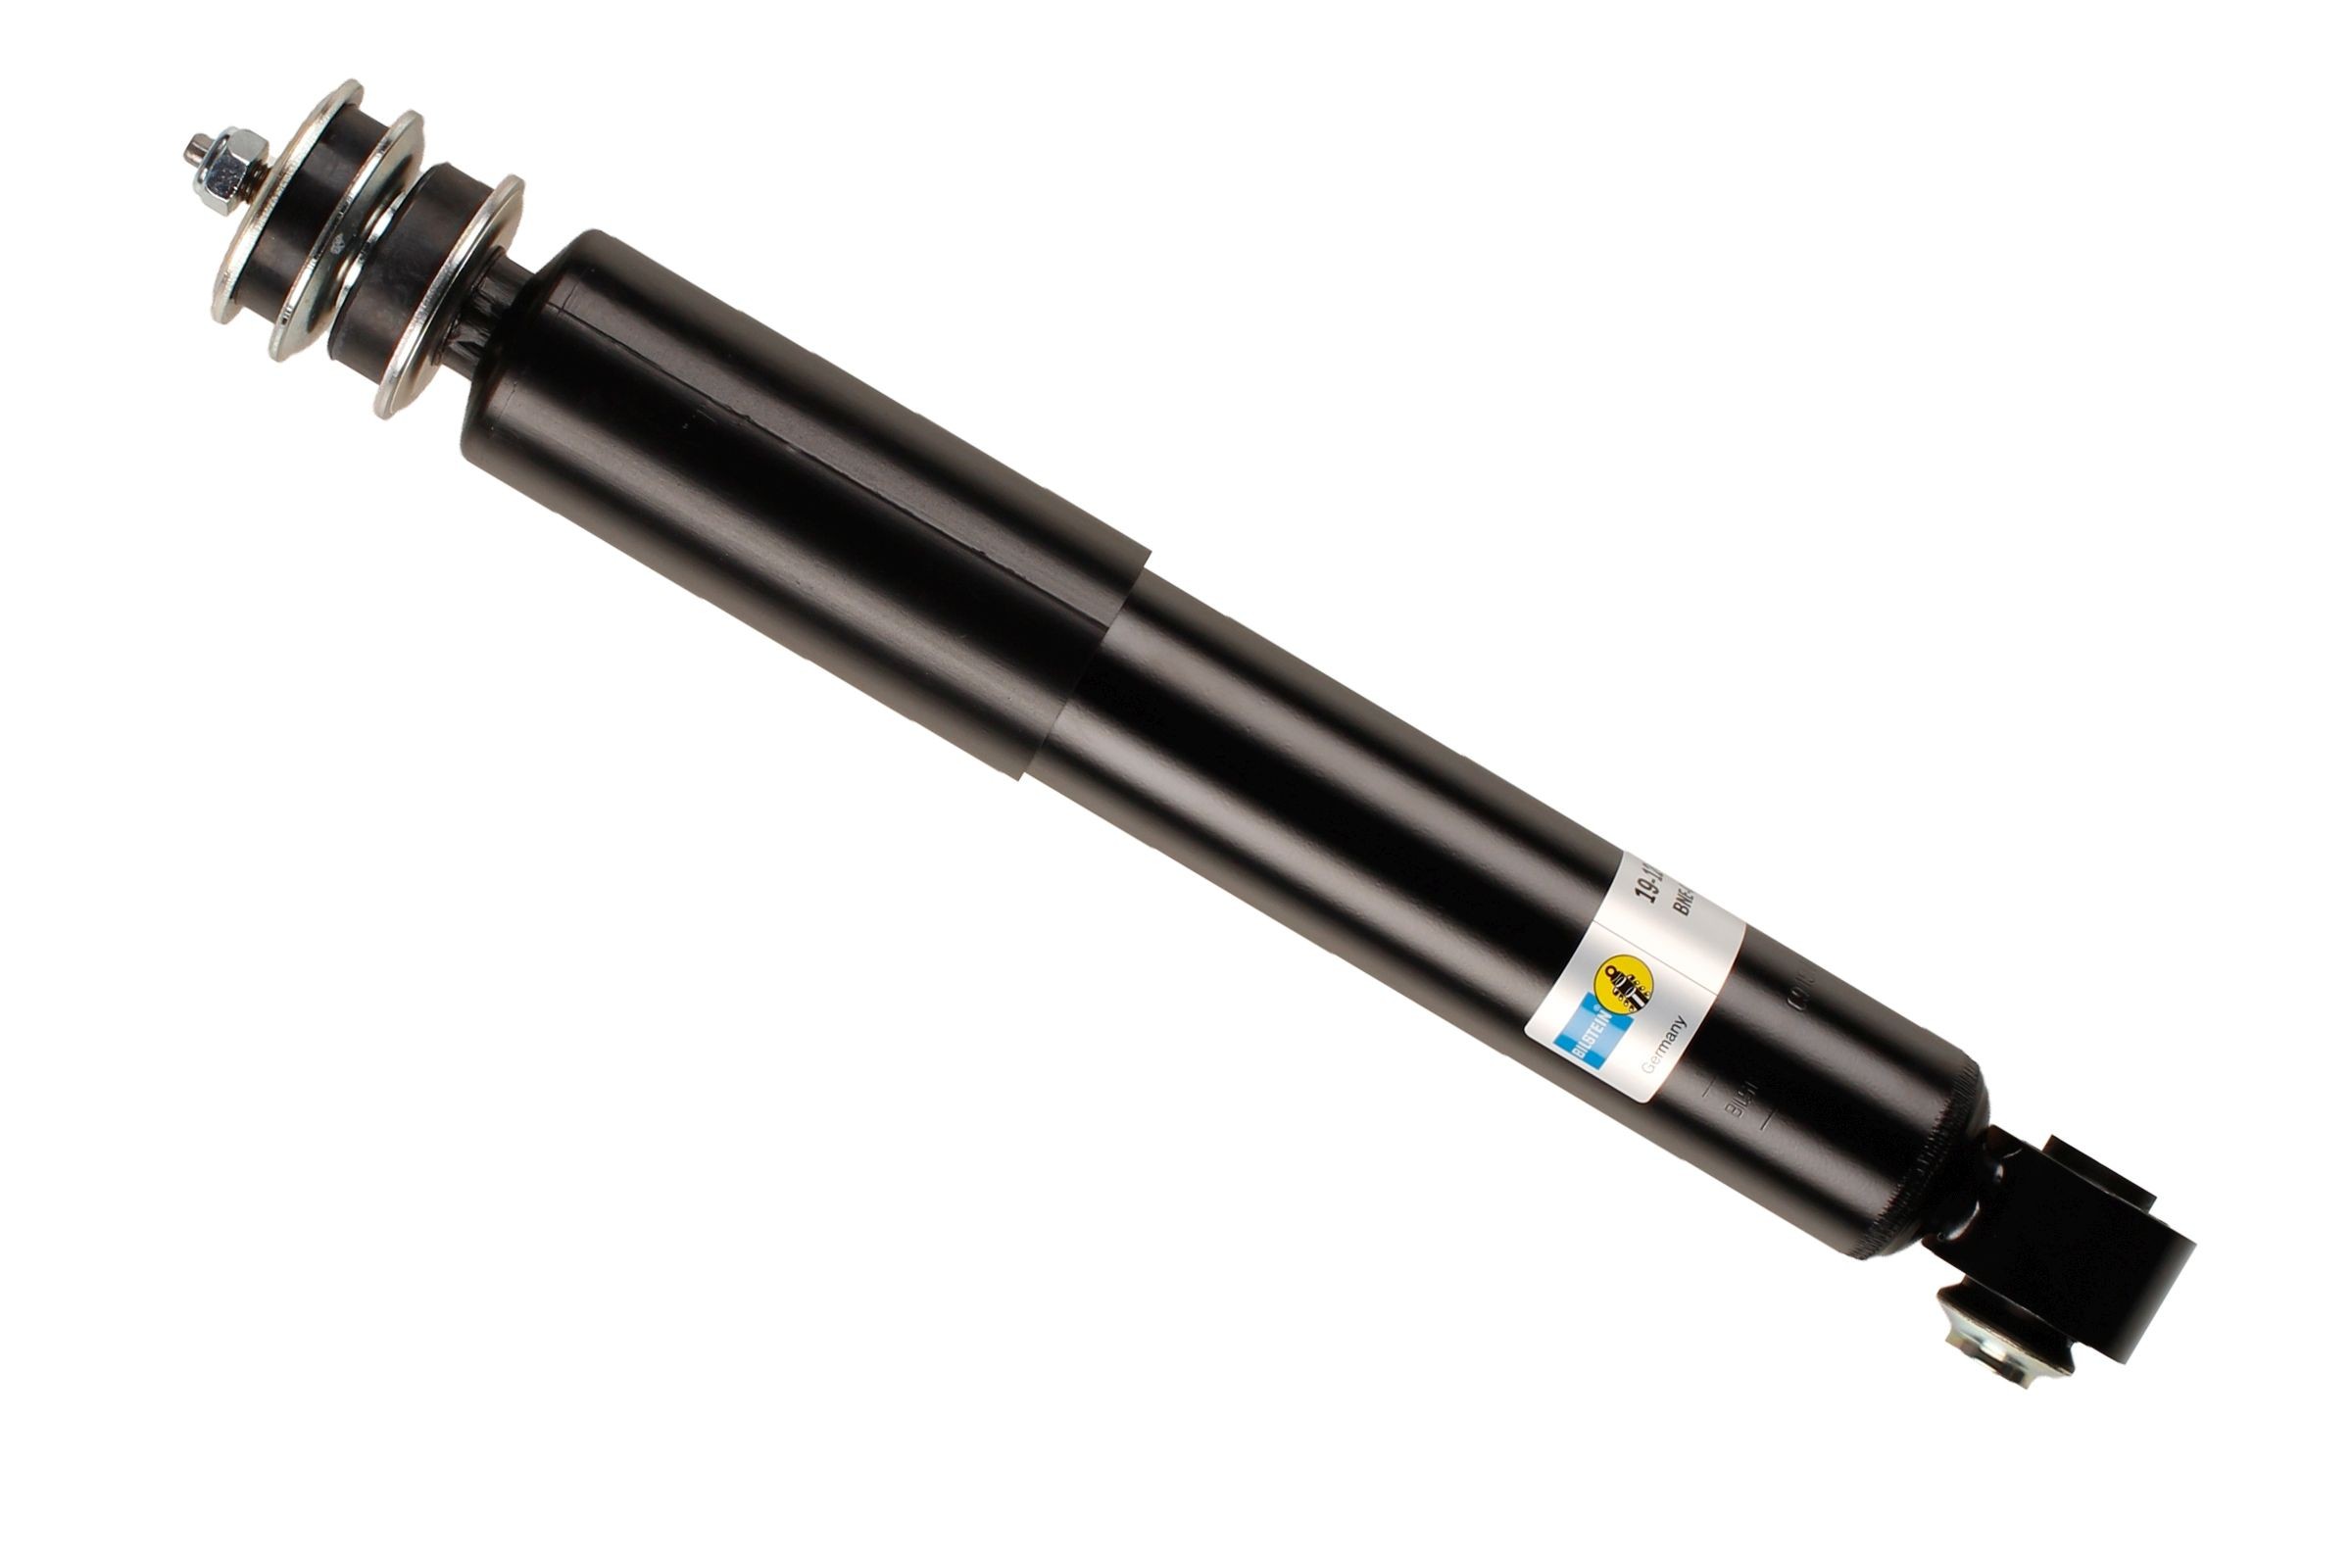 BNE-C455 BILSTEIN - B4 OE Replacement 19-124551 Shock absorber A163 326 11 00